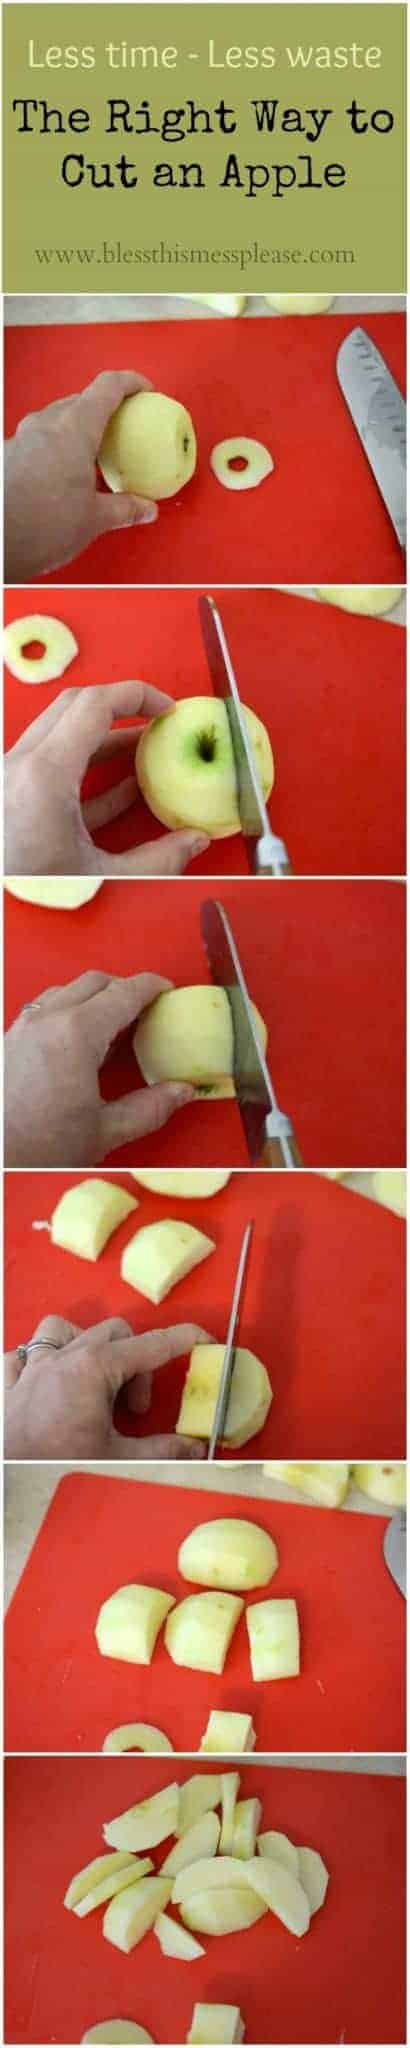 How to cut an apple from www.blessthismessplease.com Are you doing it right?! 